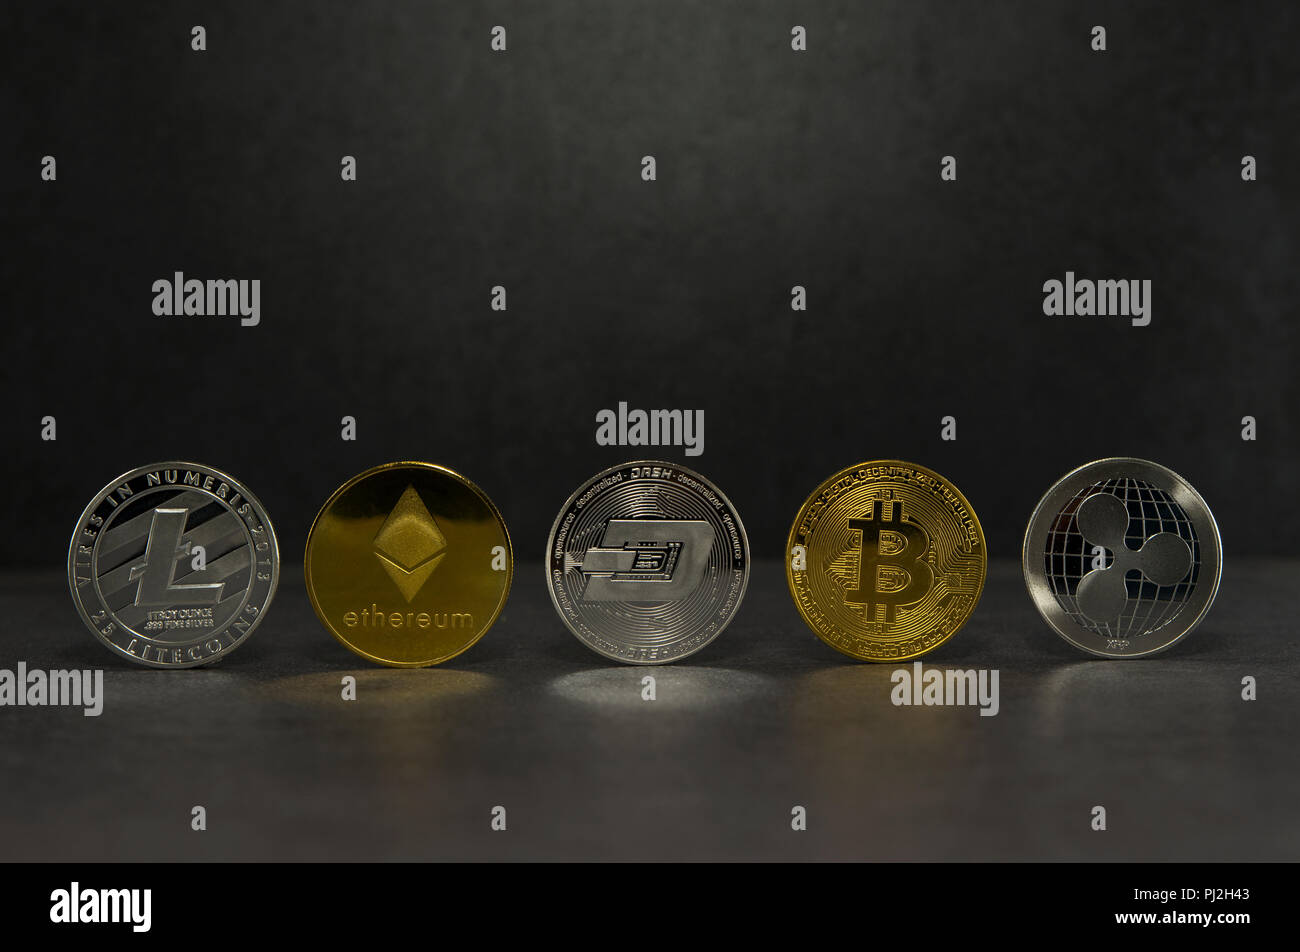 a litecoin and ethereum and dash and bitcoin and ripple together for a black background ,Coins of the four crypto currencies with the highest market capitalization  Stock Photo